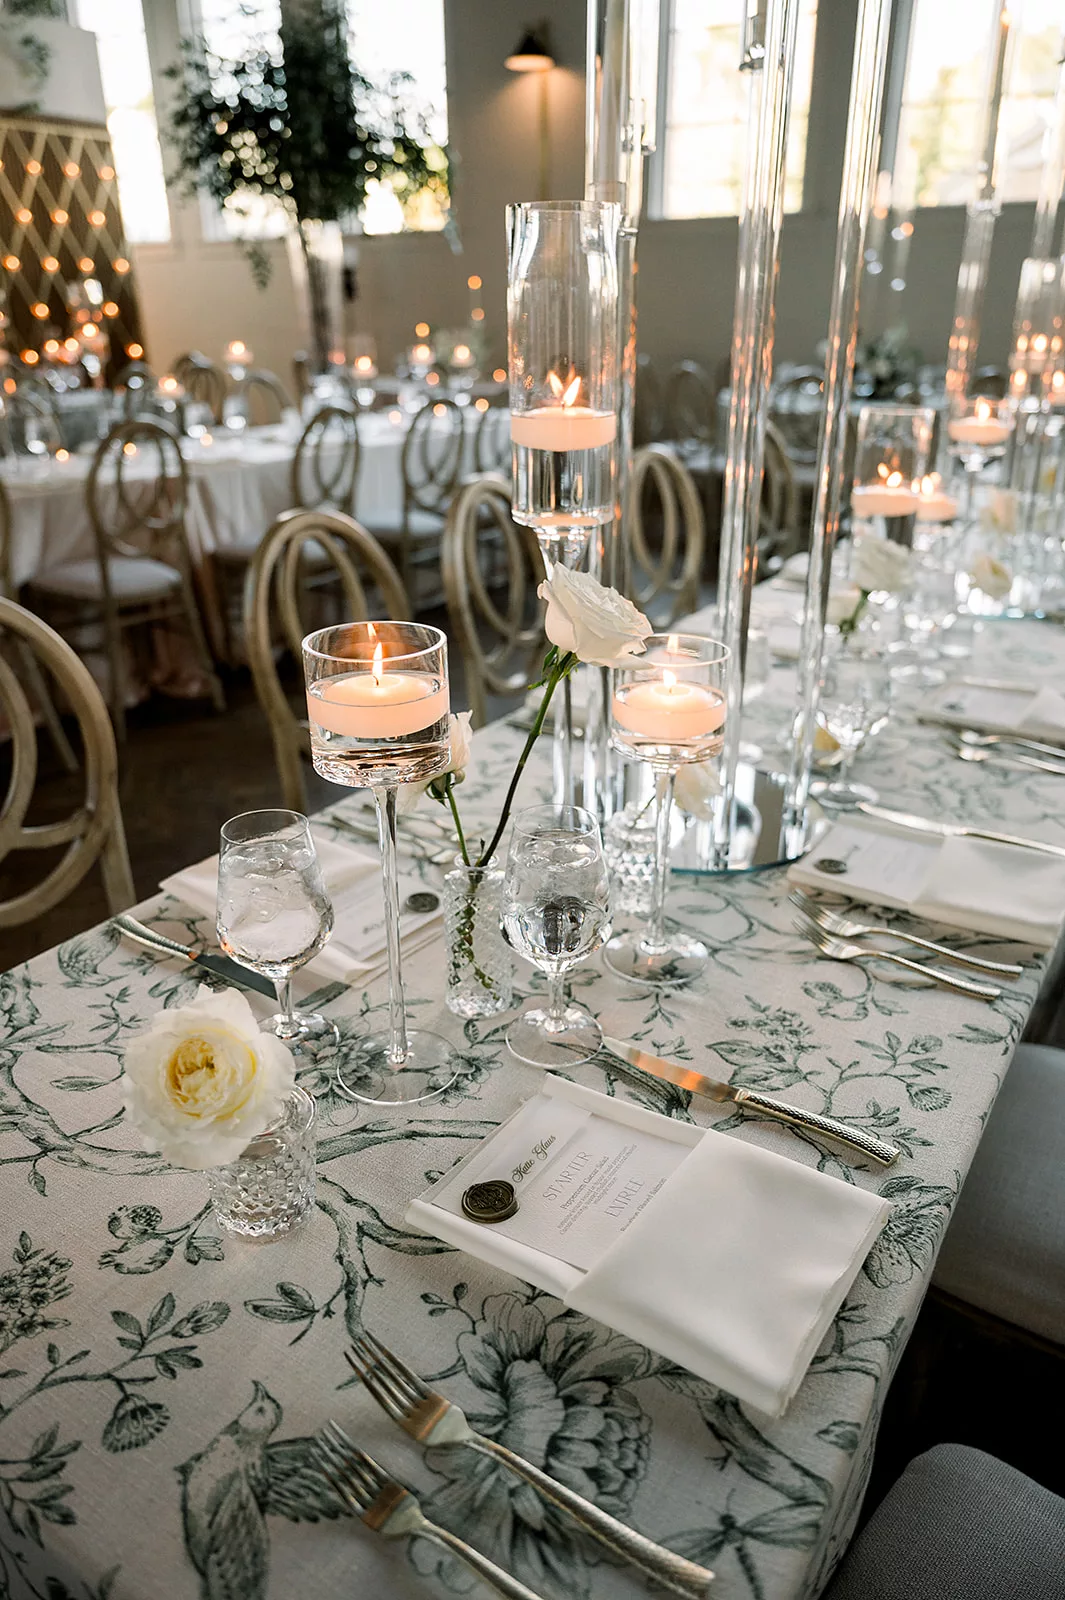 Details of a long table set up for a wedding reception with white roses